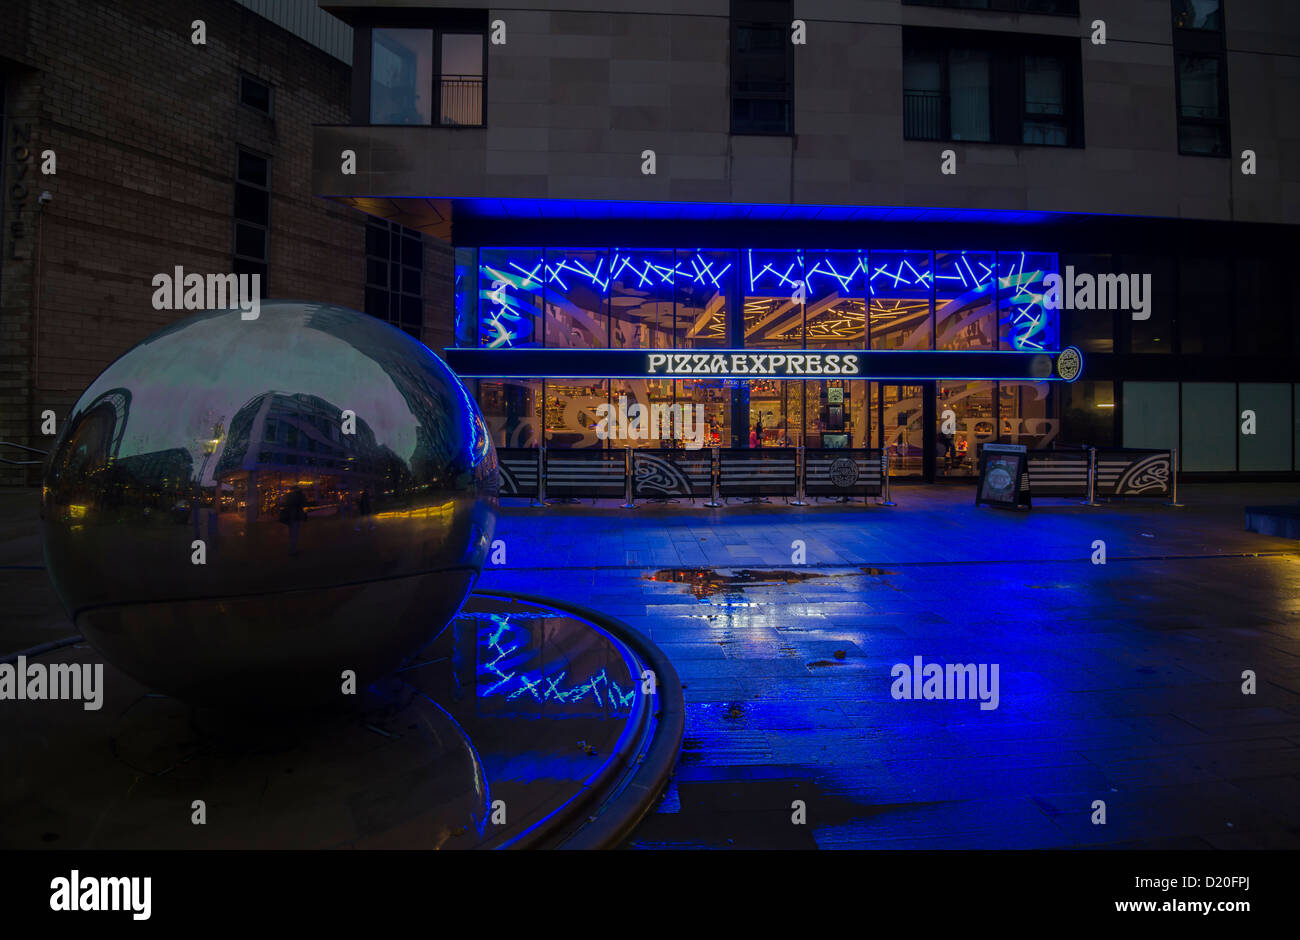 Sheffield  South Yorkshire Pizza Express  restaurant  lit up with neon lights 2012 Stock Photo